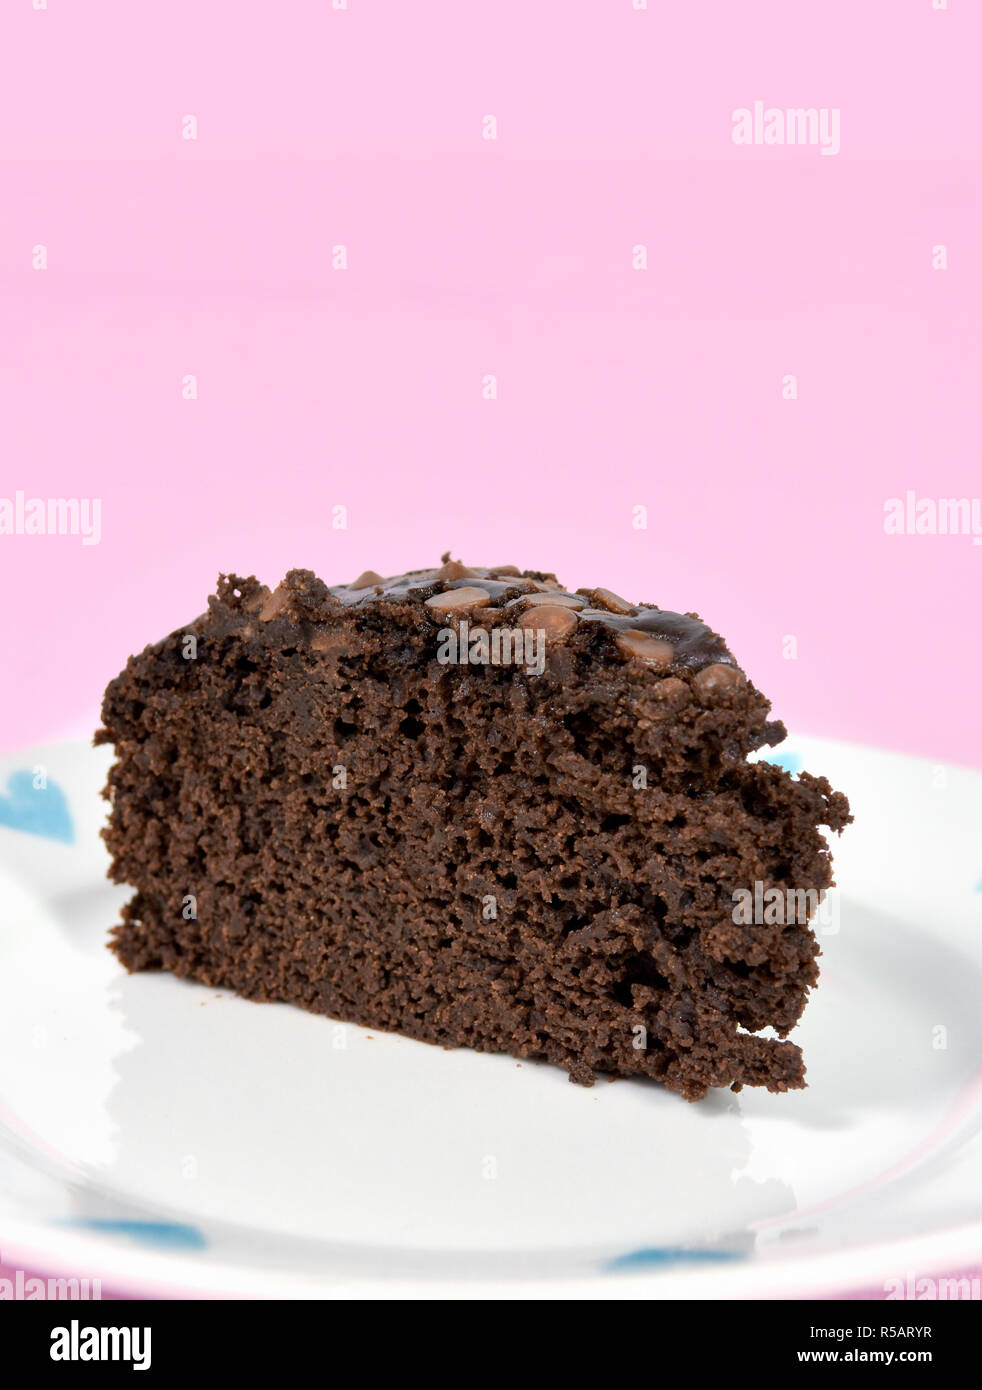 Moist chocolate cake on pretty plate made without eggs and with vegetable oil instead of butter. Against a pink background. Stock Photo